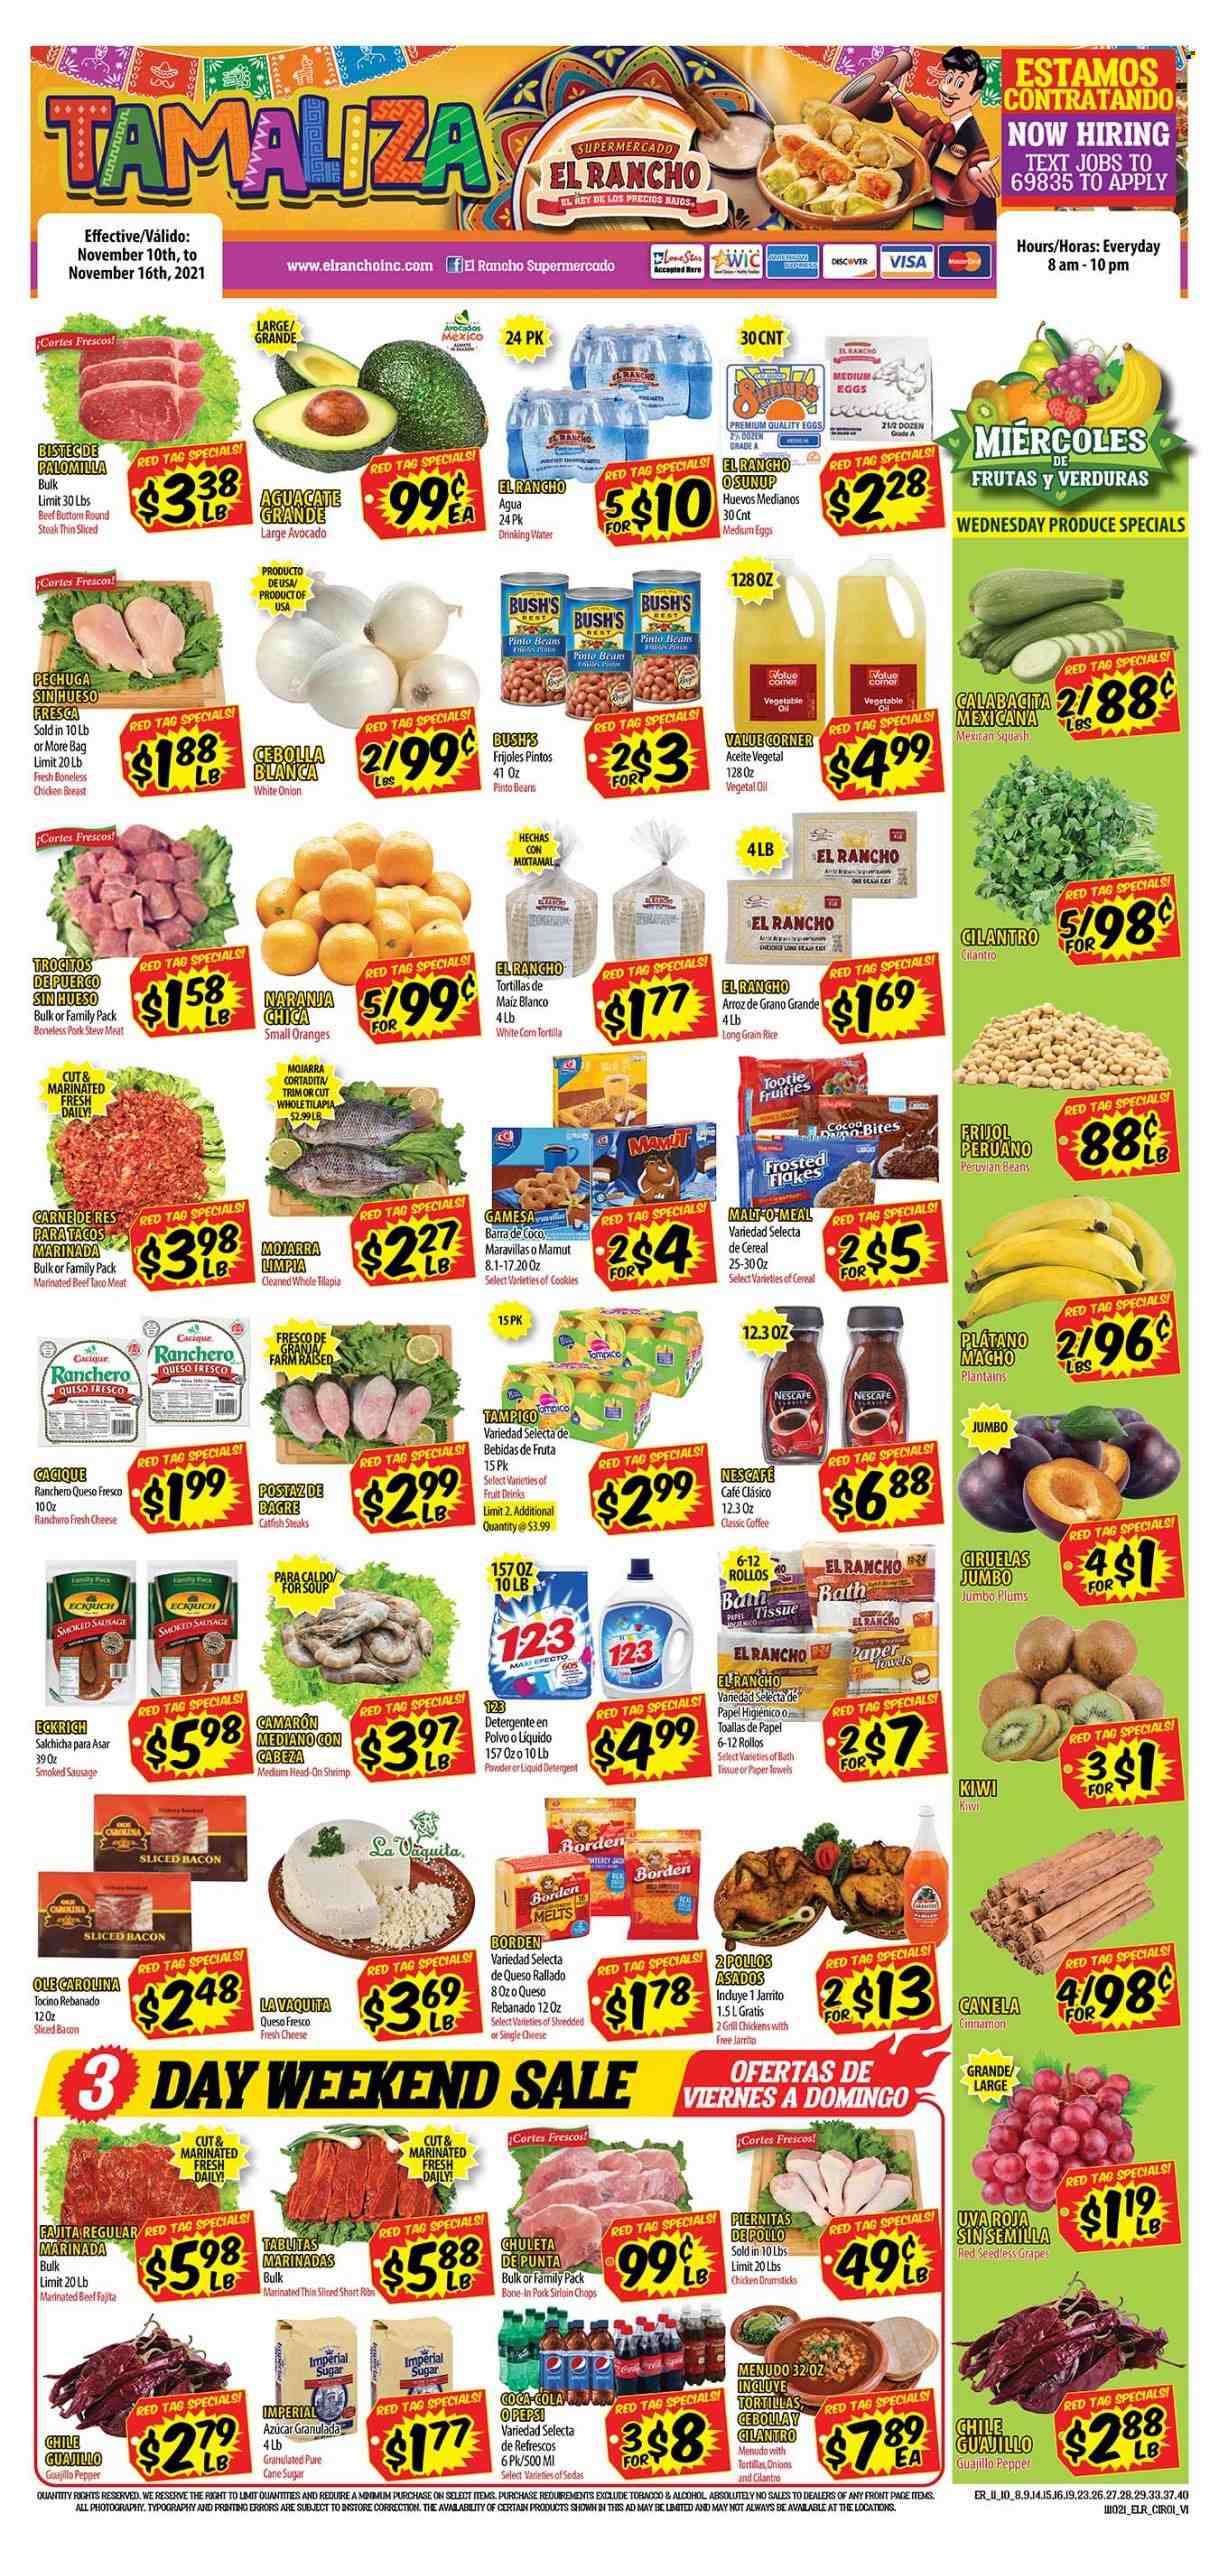 thumbnail - El Rancho Flyer - 11/10/2021 - 11/16/2021 - Sales products - stew meat, seedless grapes, plums, tortillas, avocado, grapes, kiwi, oranges, catfish, tilapia, shrimps, soup, fajita, bacon, sausage, smoked sausage, queso fresco, cheese, eggs, cookies, cane sugar, sugar, malt, pinto beans, cereals, rice, long grain rice, cilantro, cinnamon, oil, Coca-Cola, fruit punch, Nescafé, alcohol, chicken breasts, chicken drumsticks, beef meat, steak, round steak, marinated beef, pork loin, plantains. Page 1.